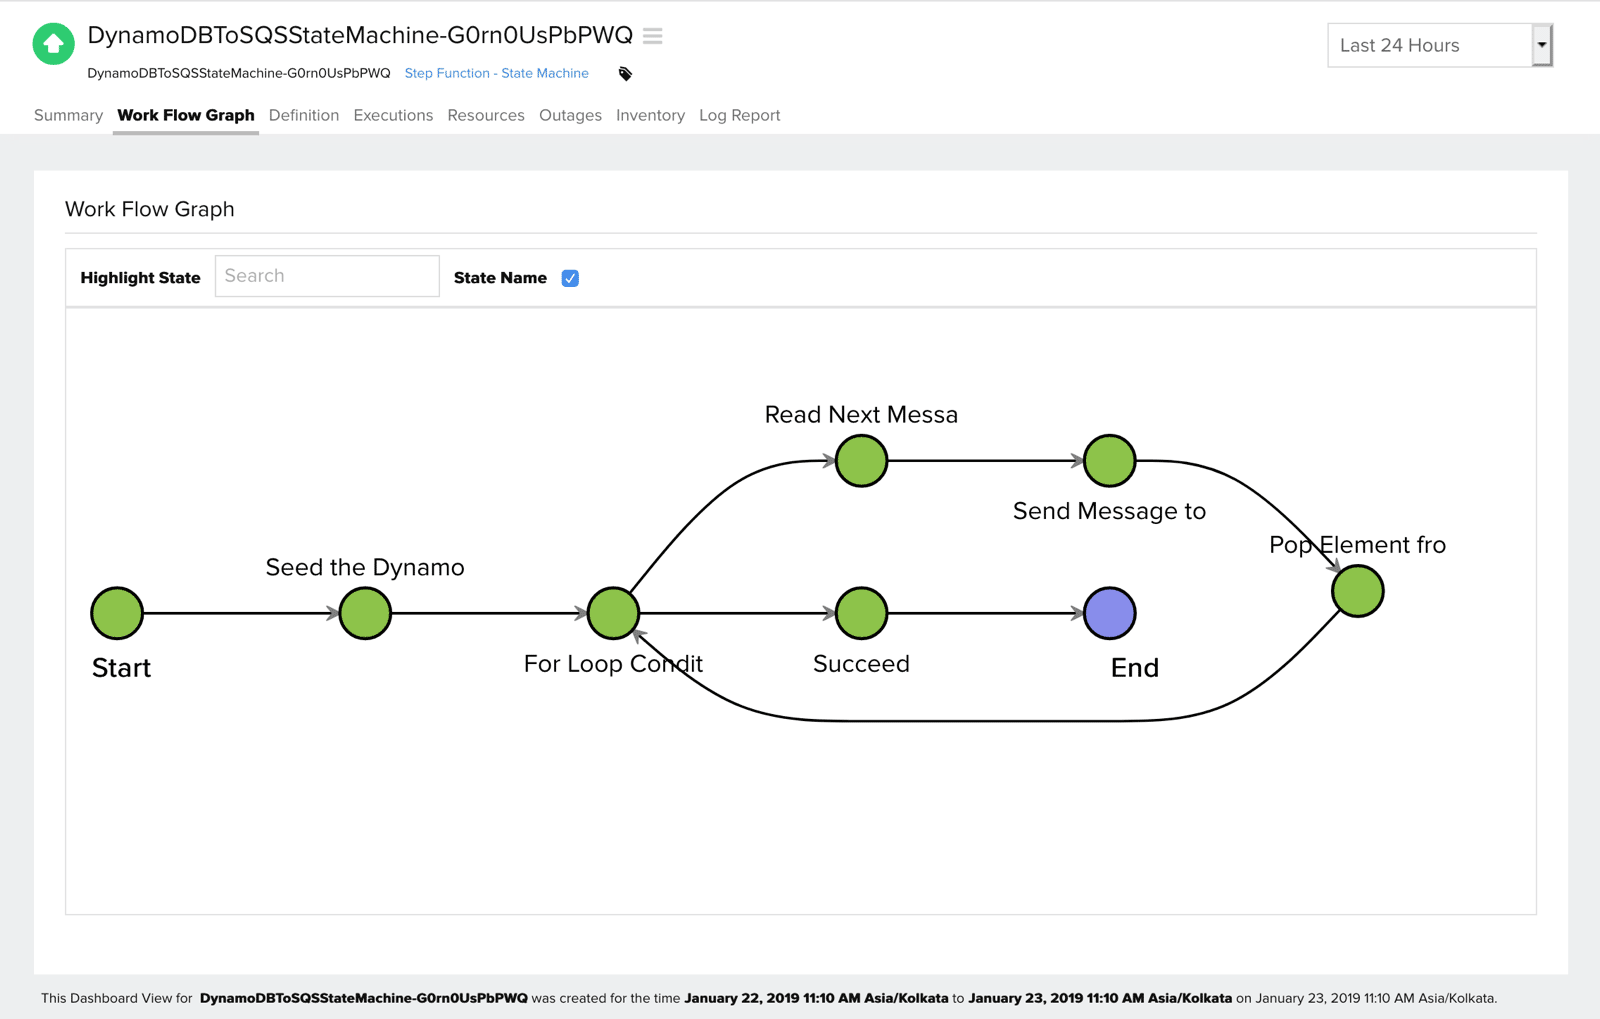 Shows a graphical representation of the state machine